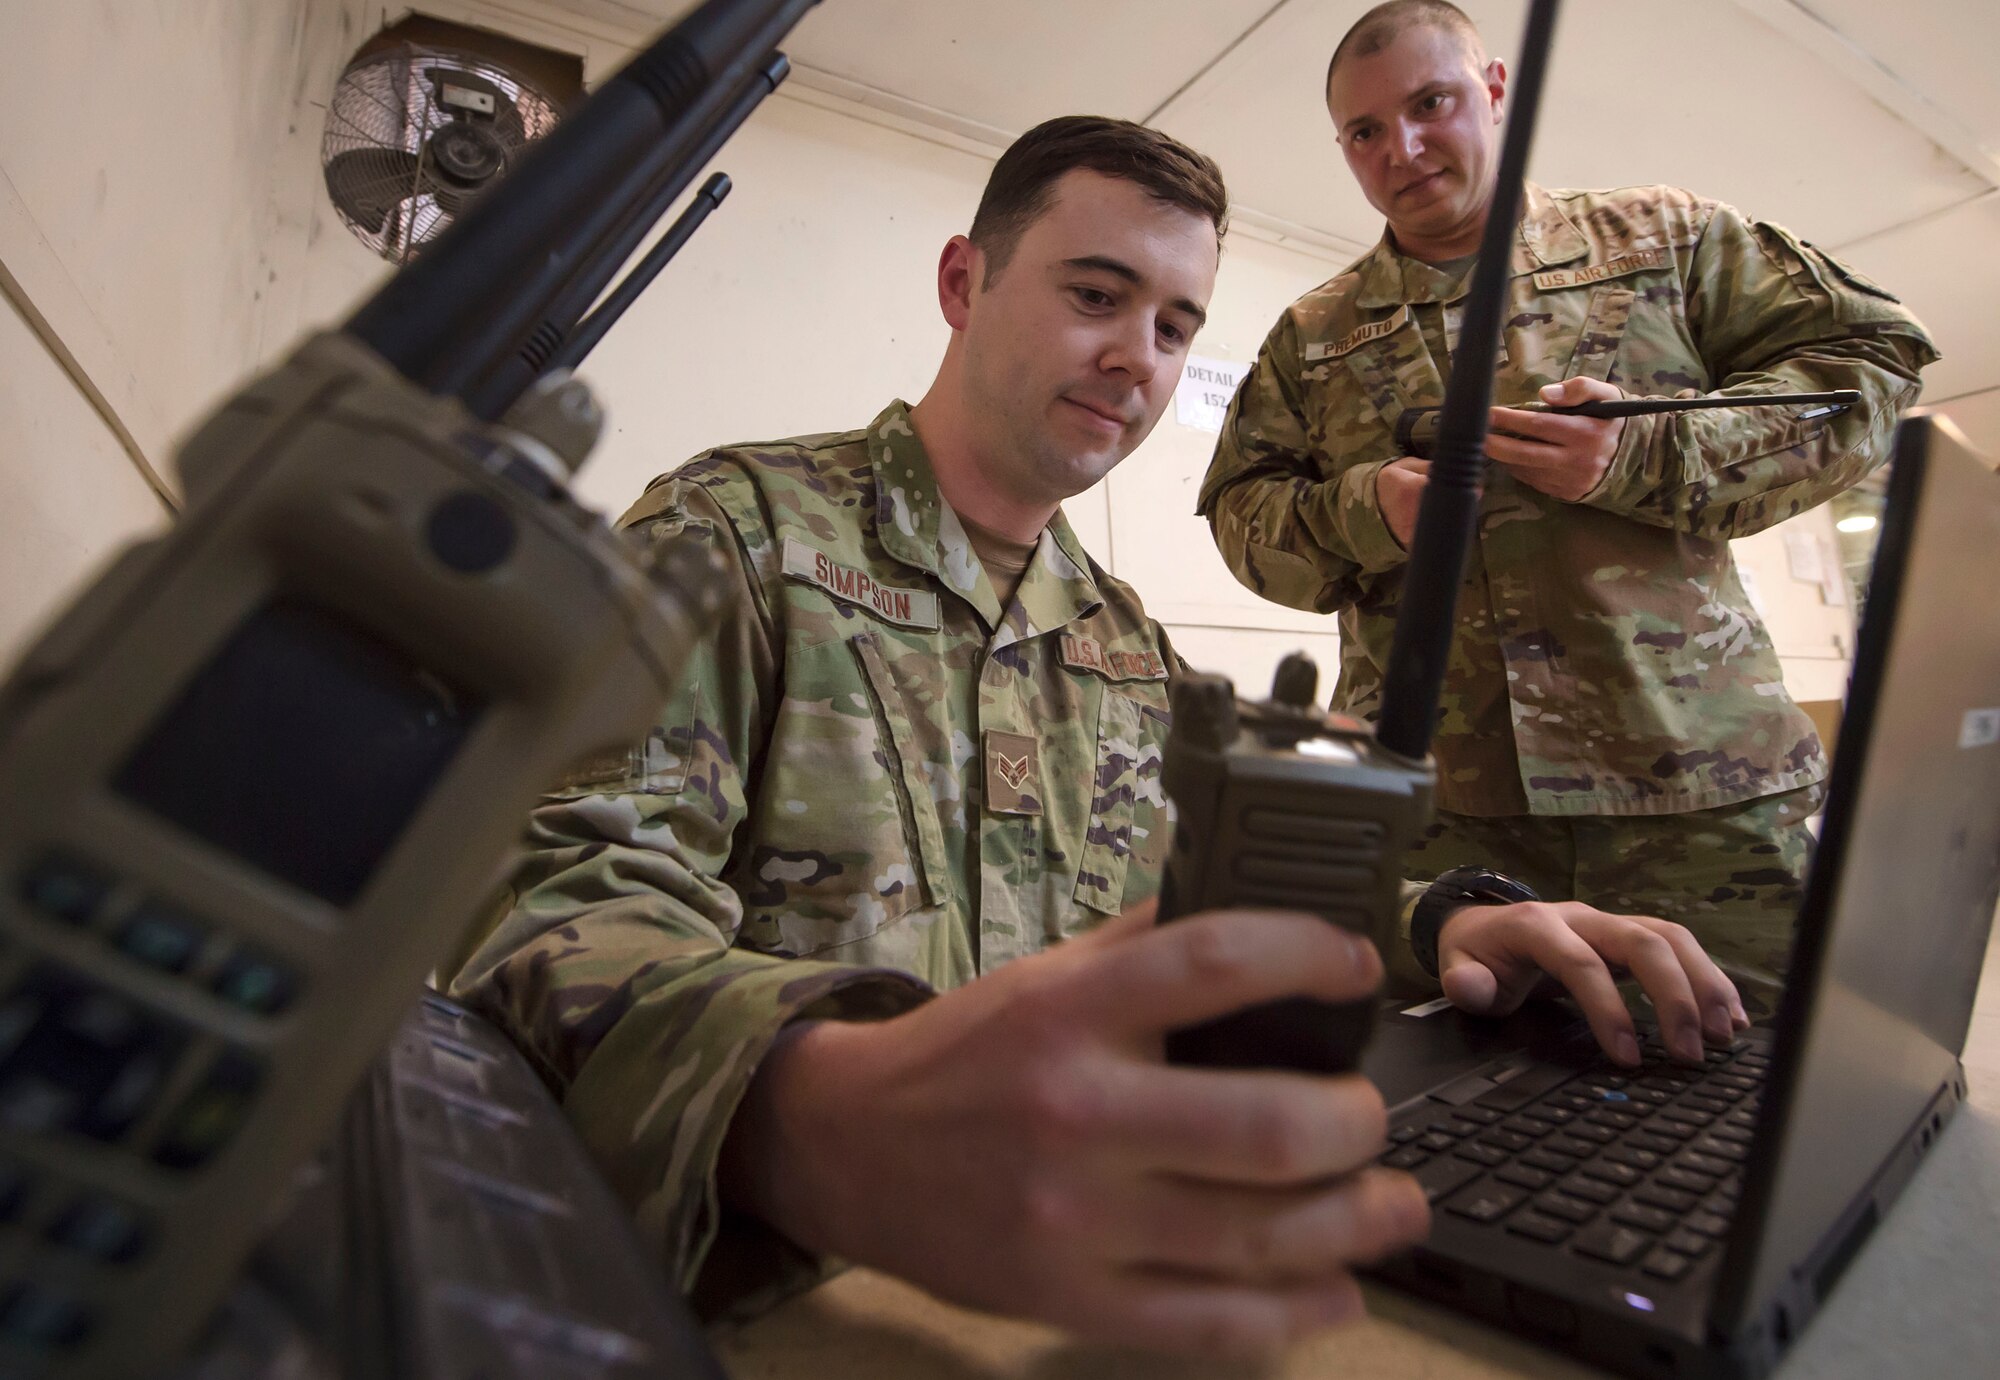 Senior Airman Joseph Simpson, (foreground) 379th Expeditionary Communications Squadron (ECS) radio frequency transmission technician, and Tech. Sgt. Frederick Premuto, 379th ECS 379th ECS radio frequency transmission NCO in charge, check communications equipment for a coalition partner facility Feb. 8, 2019, at Al Udeid Air Base, Qatar. Simpson and Premuto are part of a “beddown” team that enables power projection by establishing communications capabilities such as networks, Voice over Internet Protocol telephones, and radios from the ground up (U.S. Air Force photo by Tech. Sgt. Christopher Hubenthal)